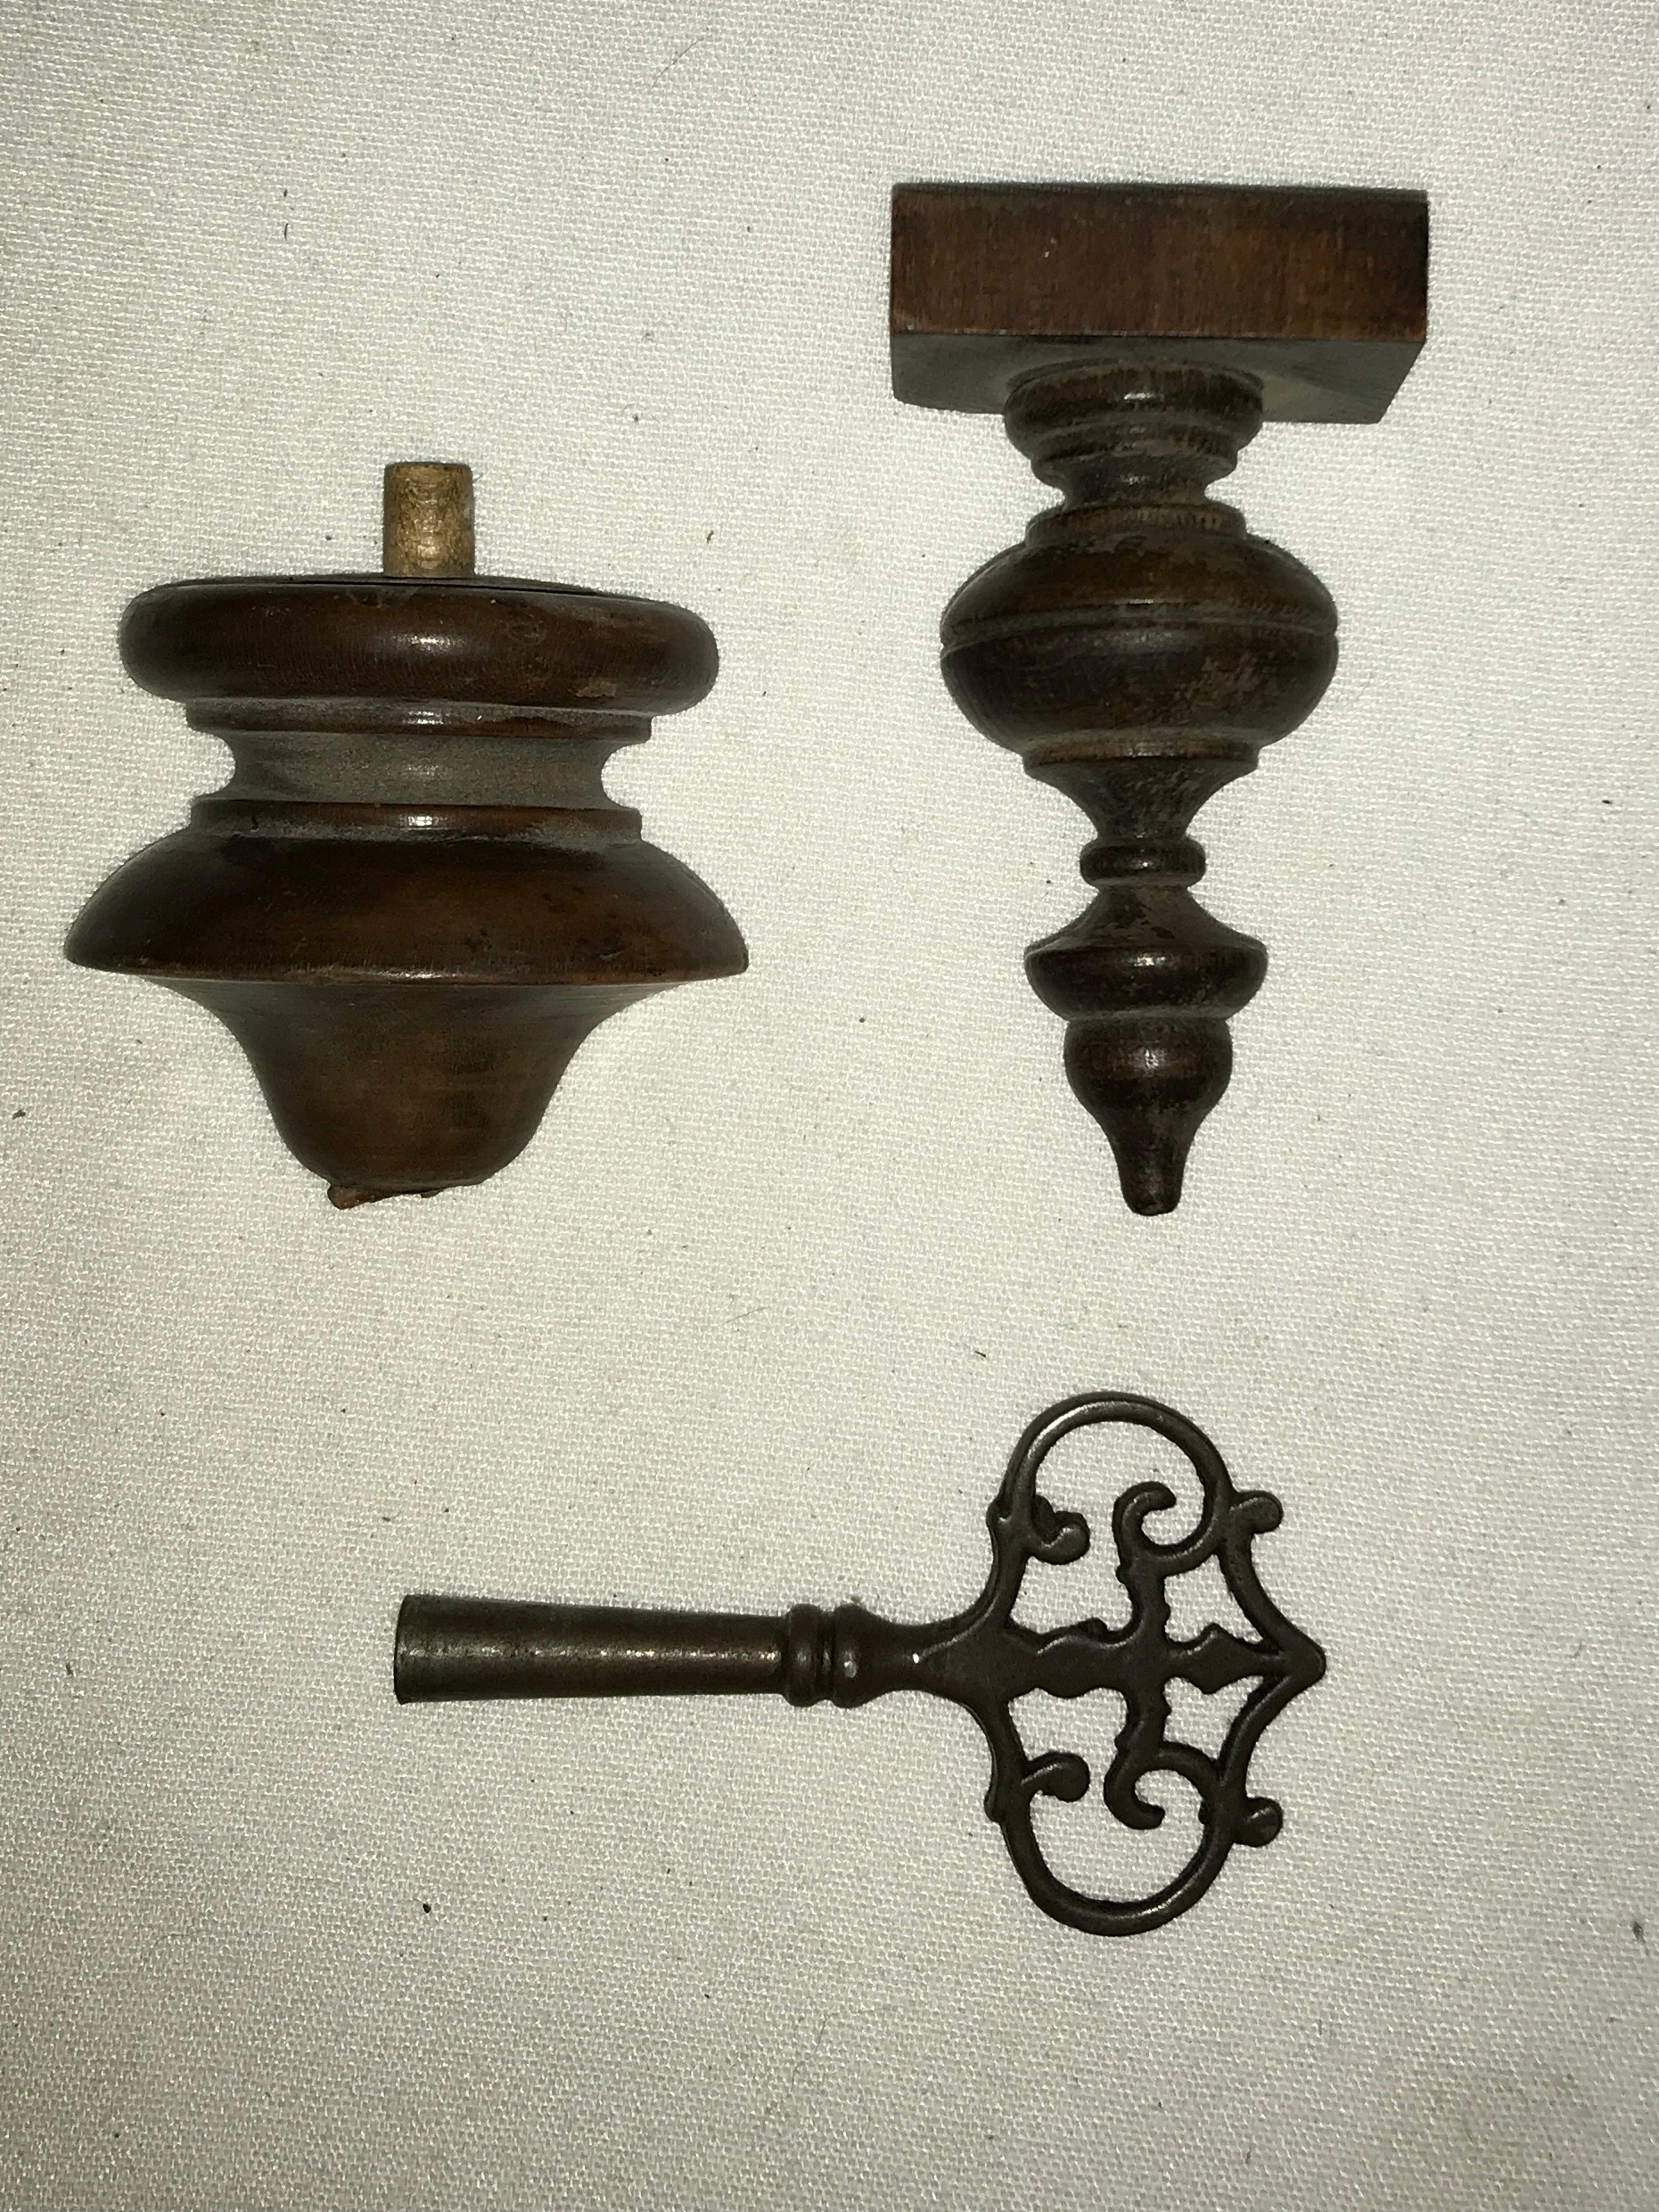 A wall clock with R A marked on pendulum with key. Approx. 60 h x 16 d x 30cm w. - Image 4 of 6